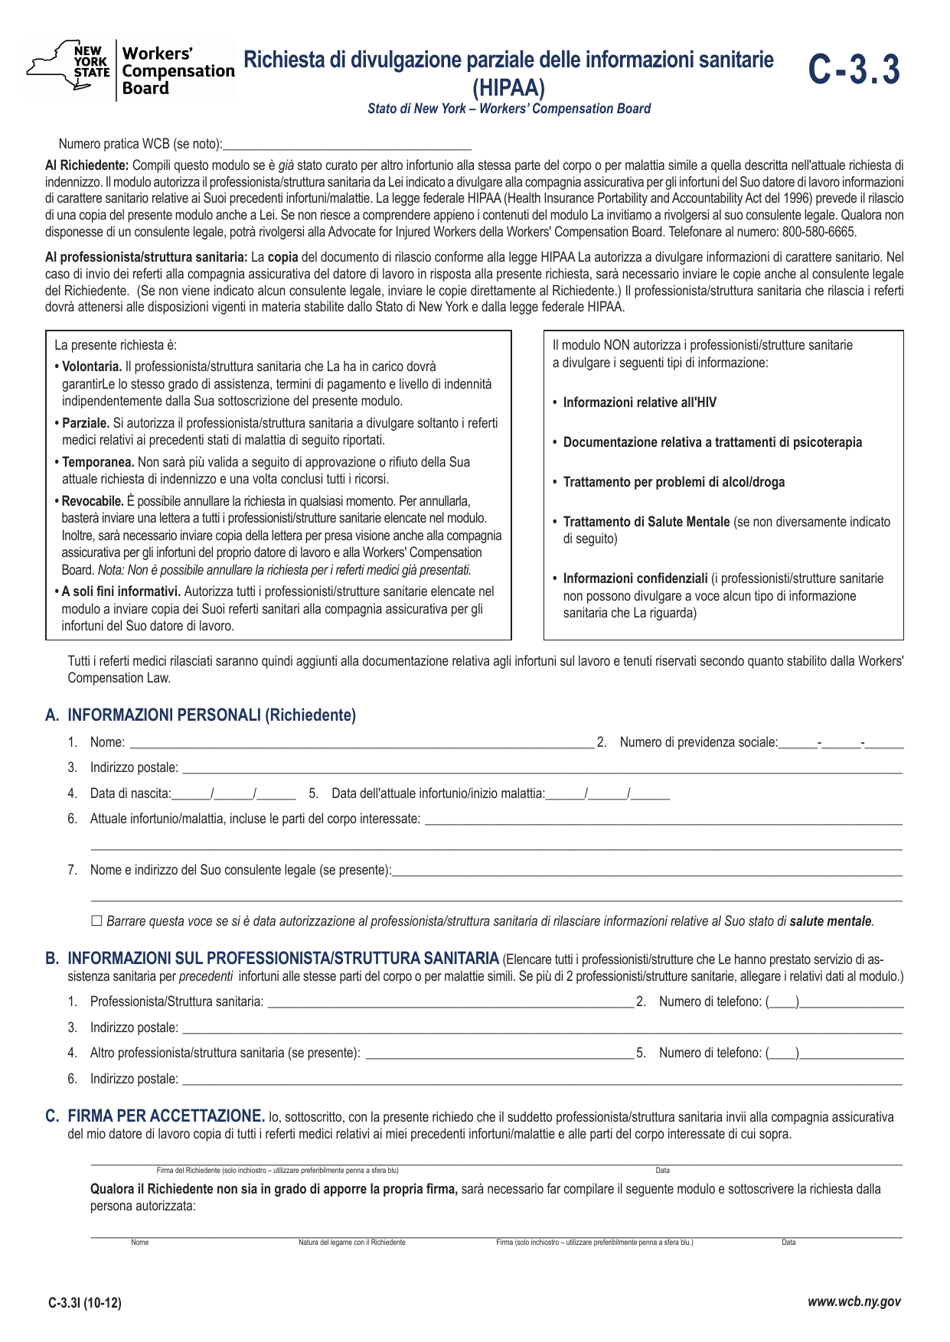 Form C-3.3I Limited Release of Health Information (HIPAA) - New York (Italian), Page 1